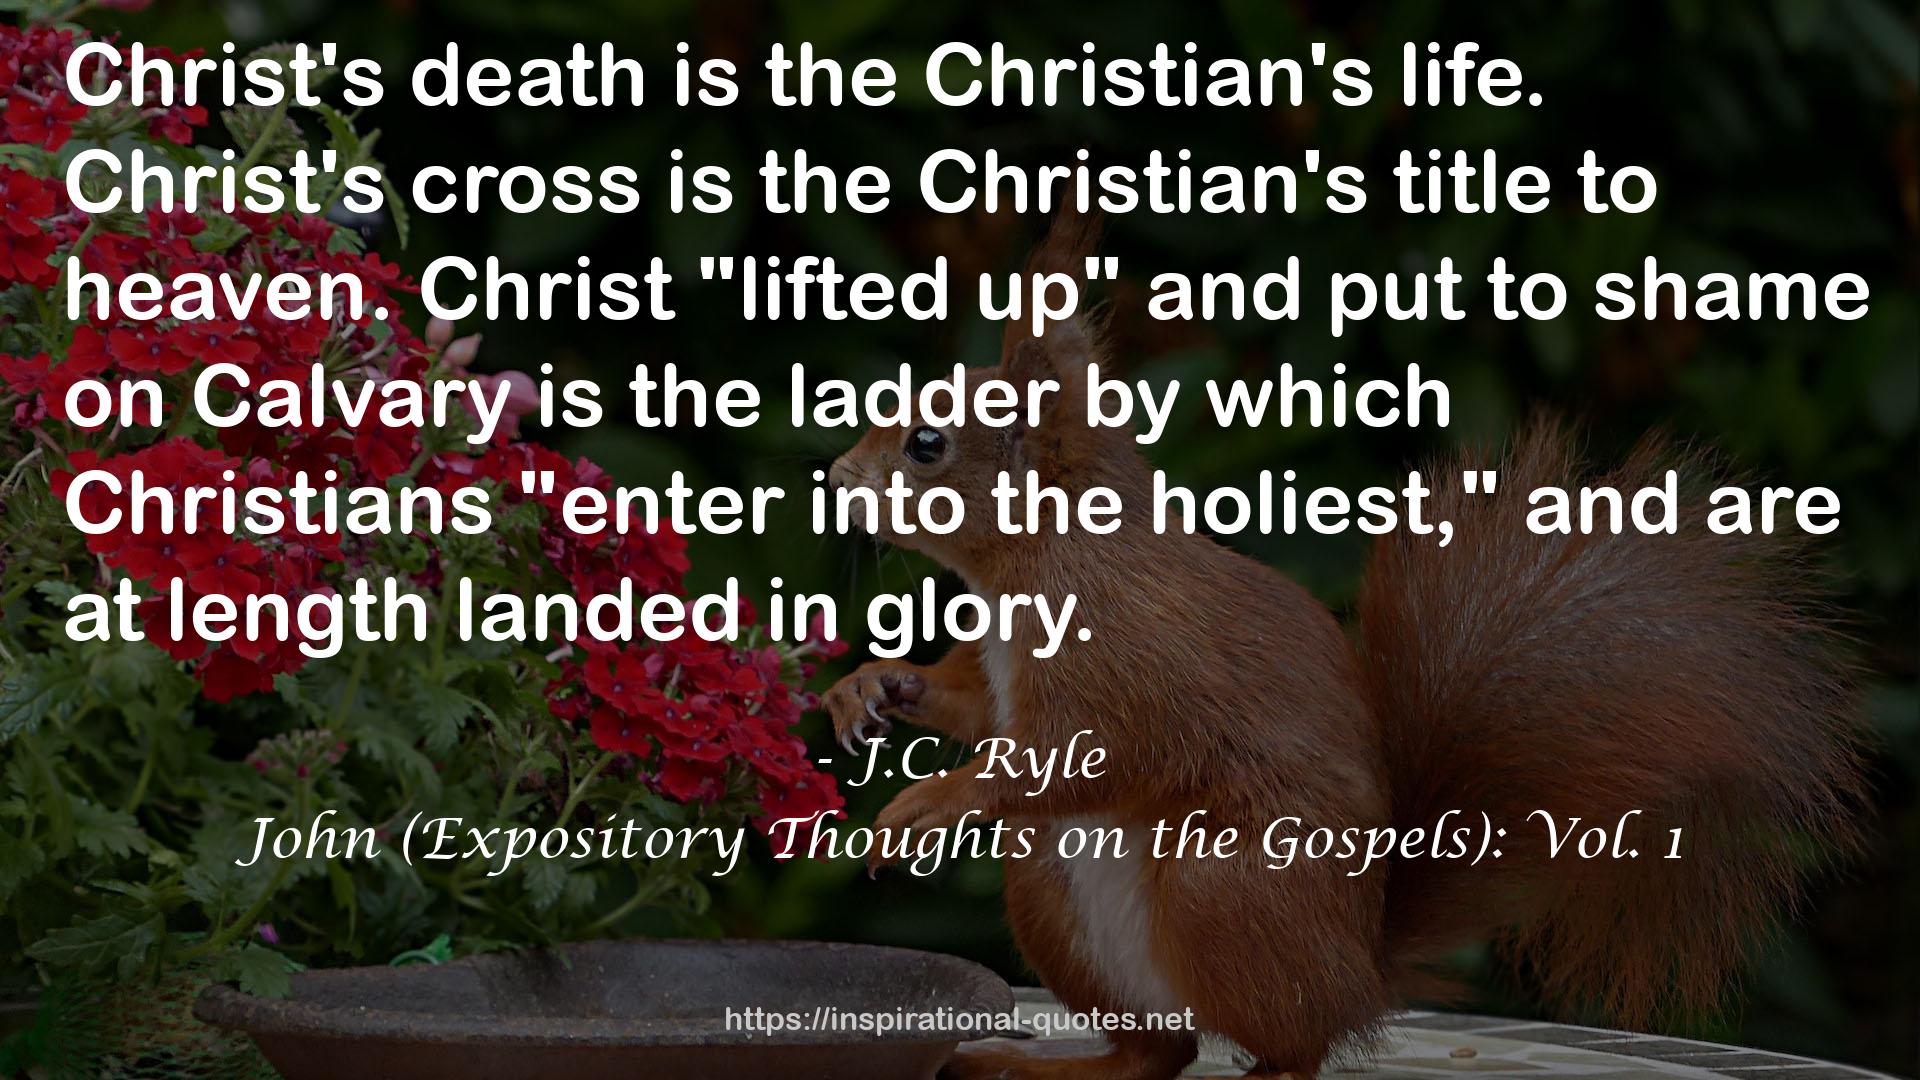 John (Expository Thoughts on the Gospels): Vol. 1 QUOTES